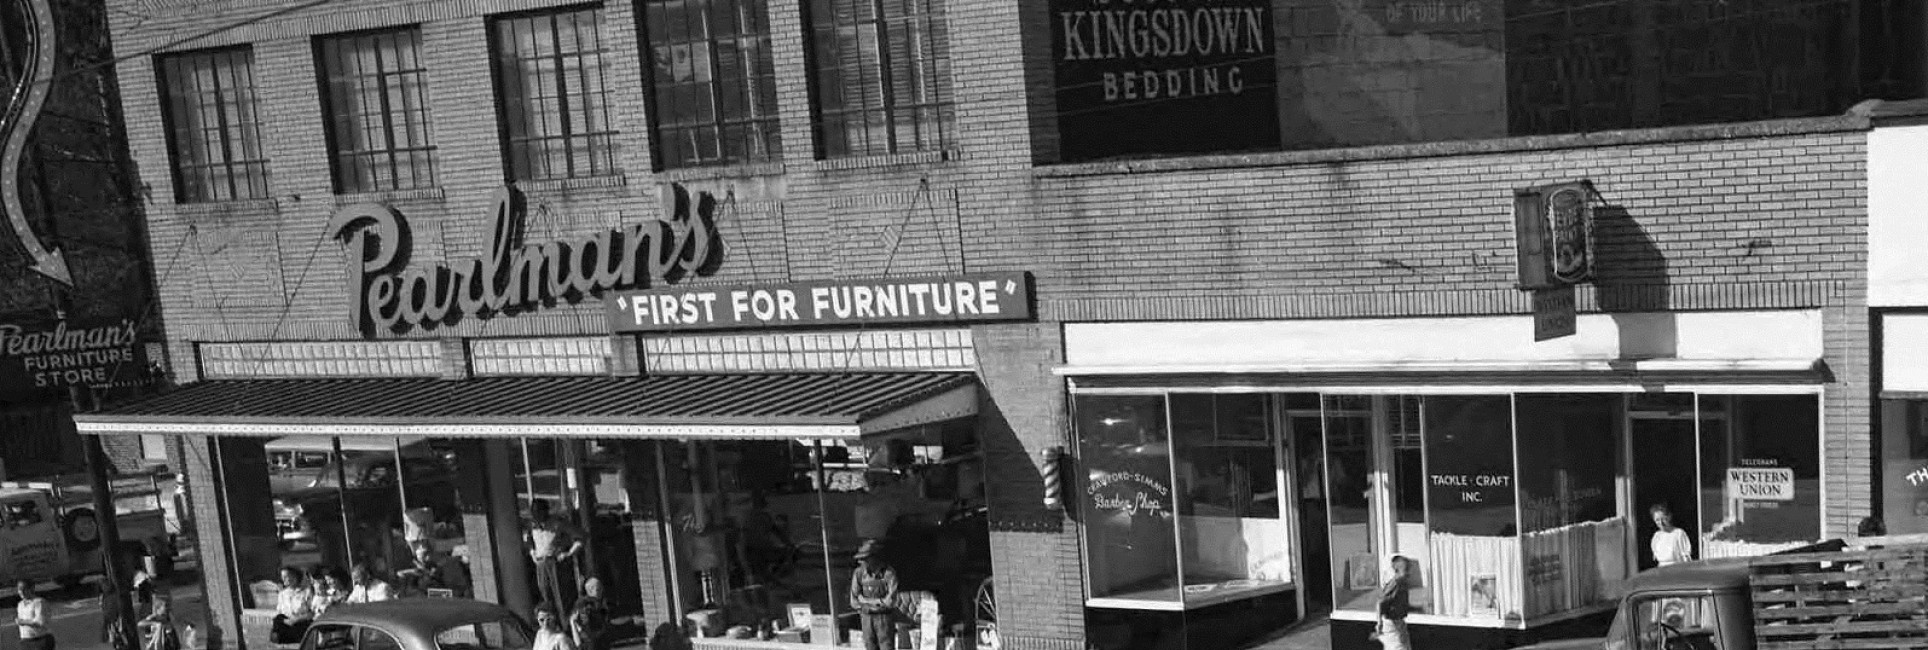 Pearlman's later Rice Furniture